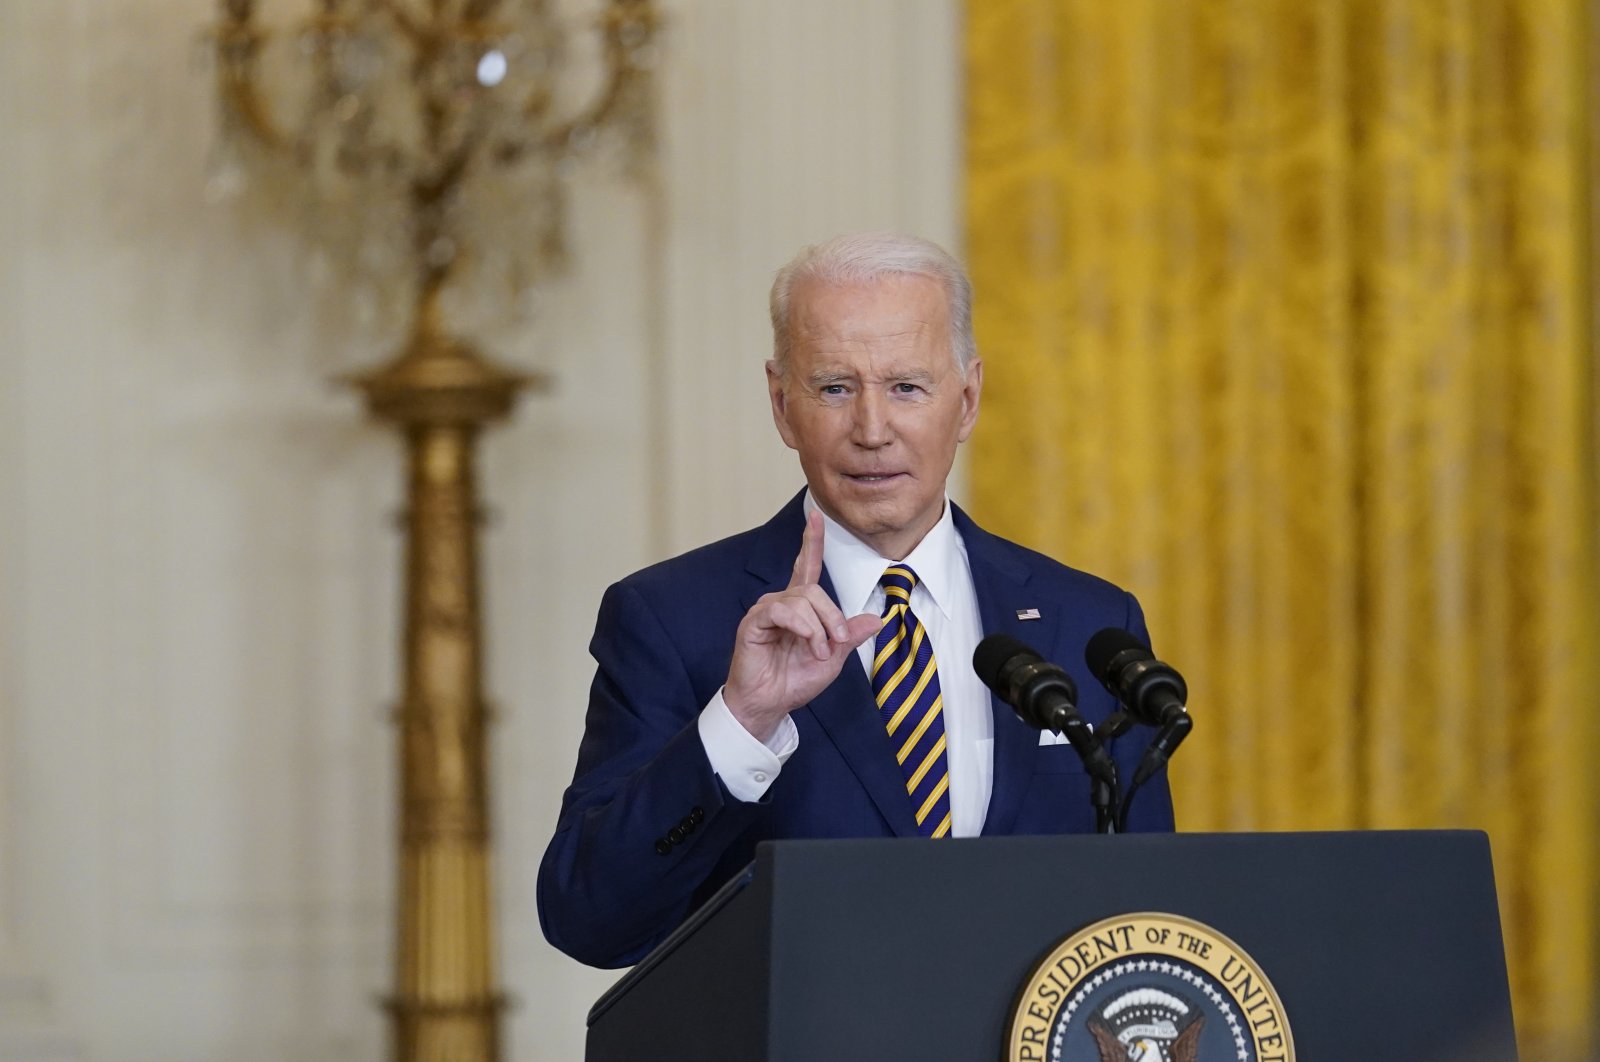 President Joe Biden speaks during a news conference in the East Room of the White House in Washington, D.C., U.S., Jan. 19, 2022. (AP Photo)